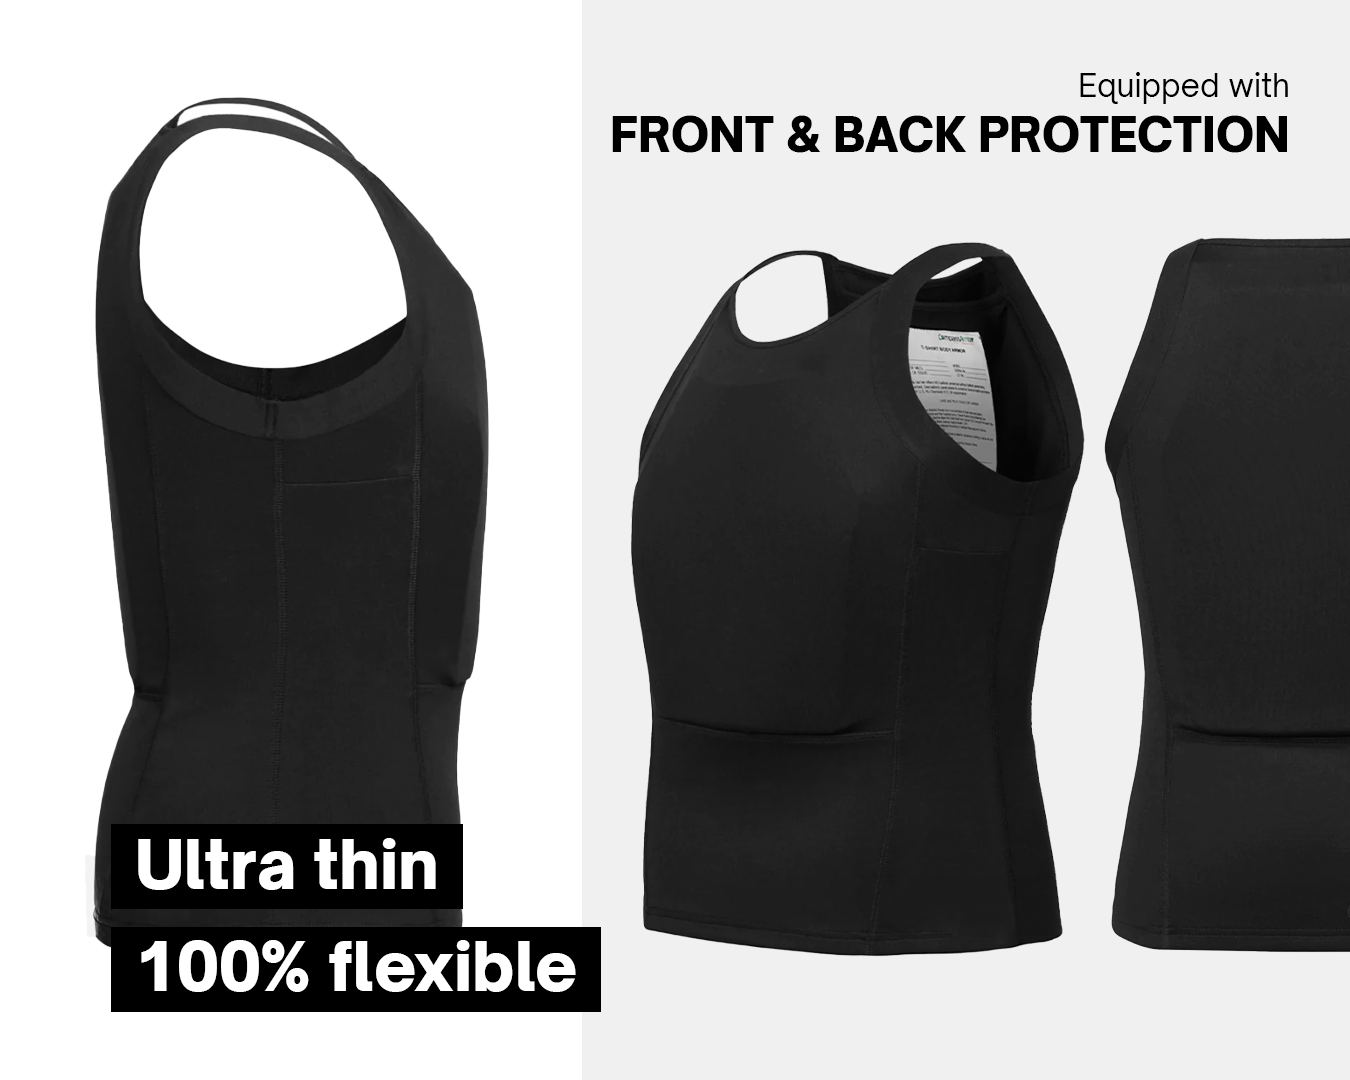 Ultra Thin Bulletproof Body Armor Shirt Vest Equipped with Front and Back Protection